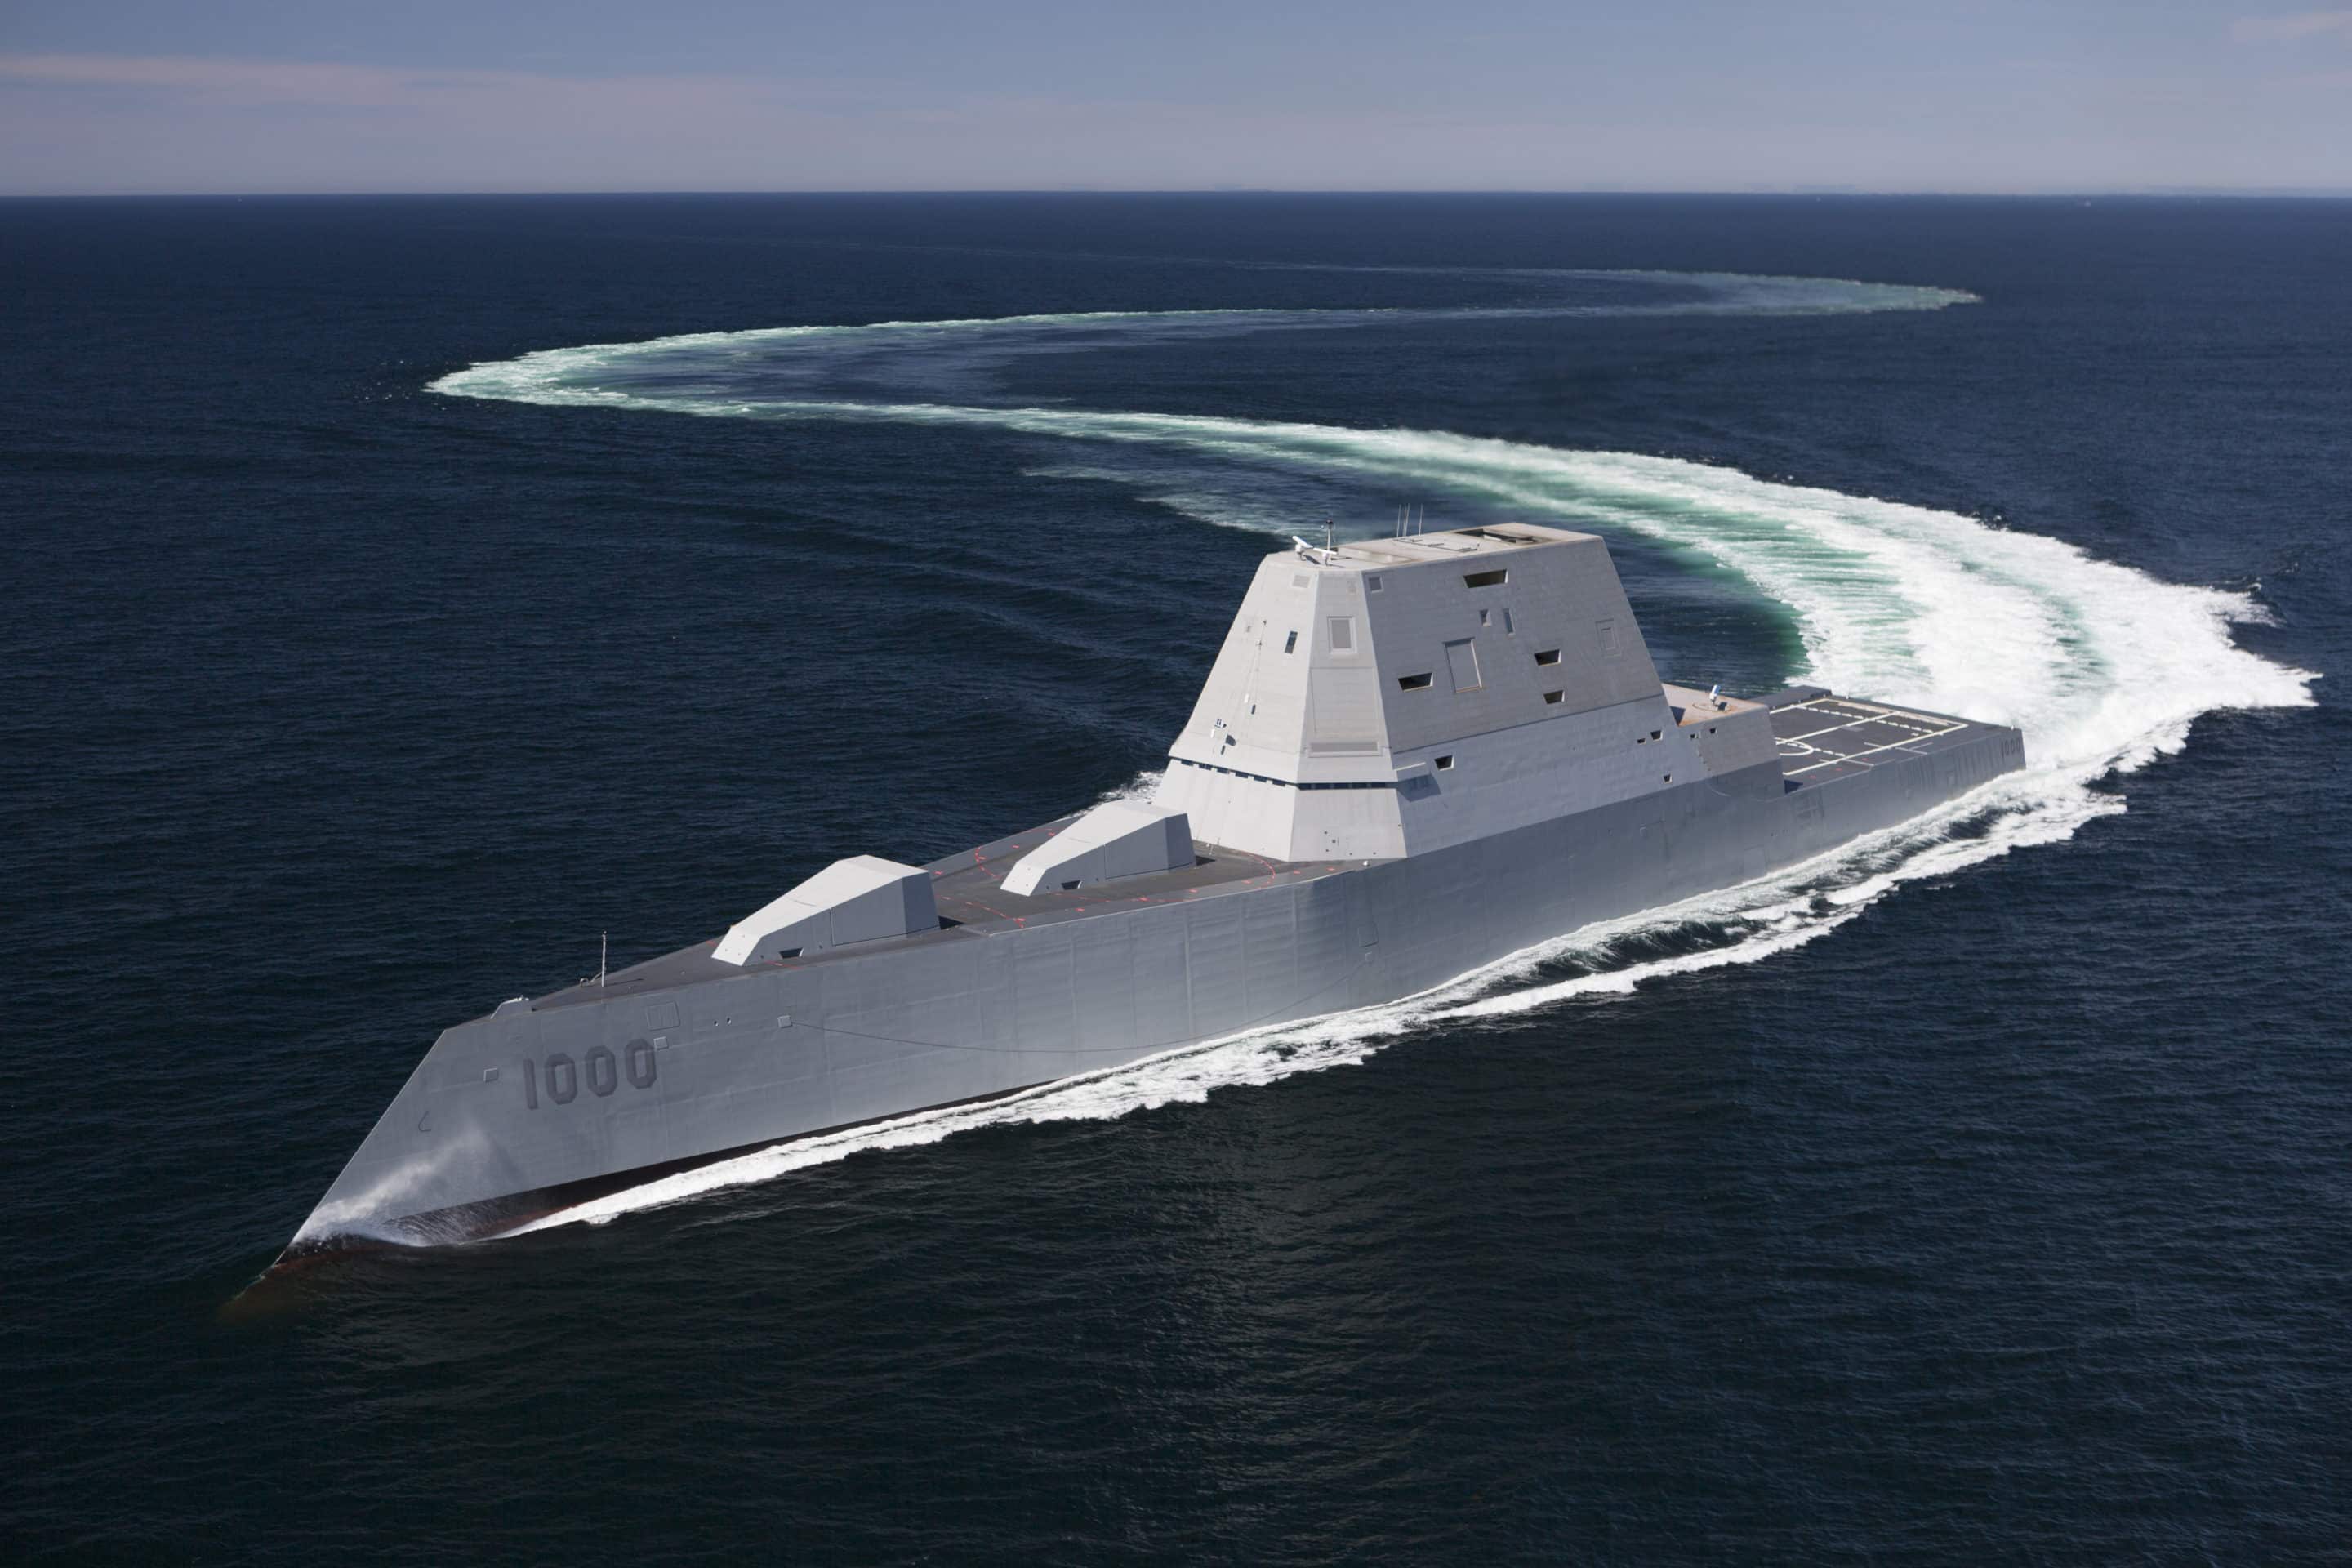 Pentagon Plans to Deploy Hypersonic Missiles on Problematic Warship